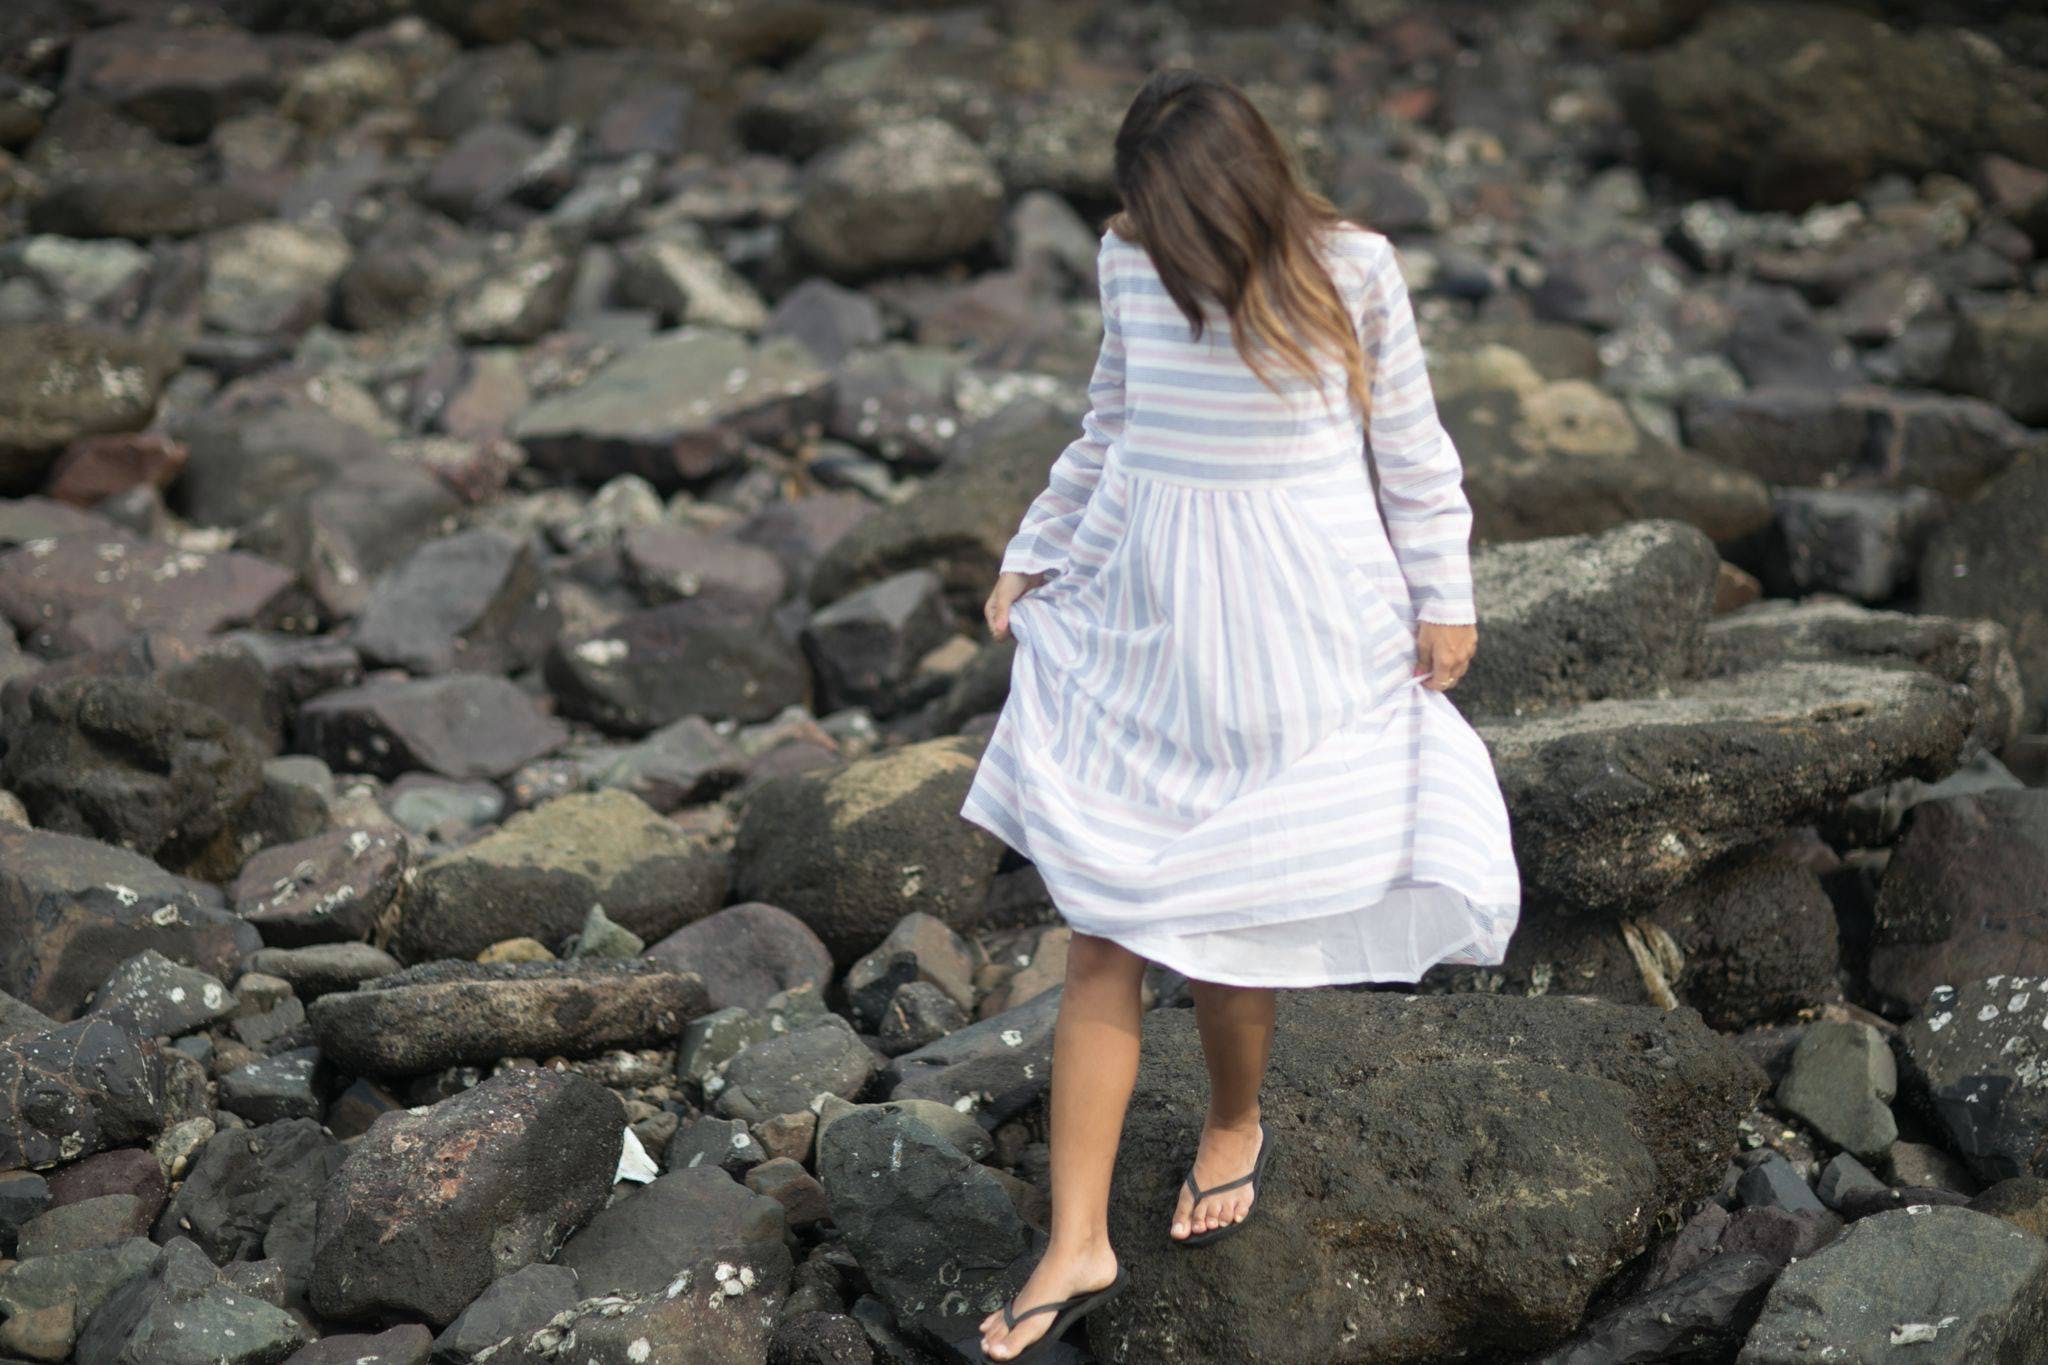 People in nature,Photograph,Water,Beauty,Photography,Dress,Rock,Photo shoot,Barefoot,Sea